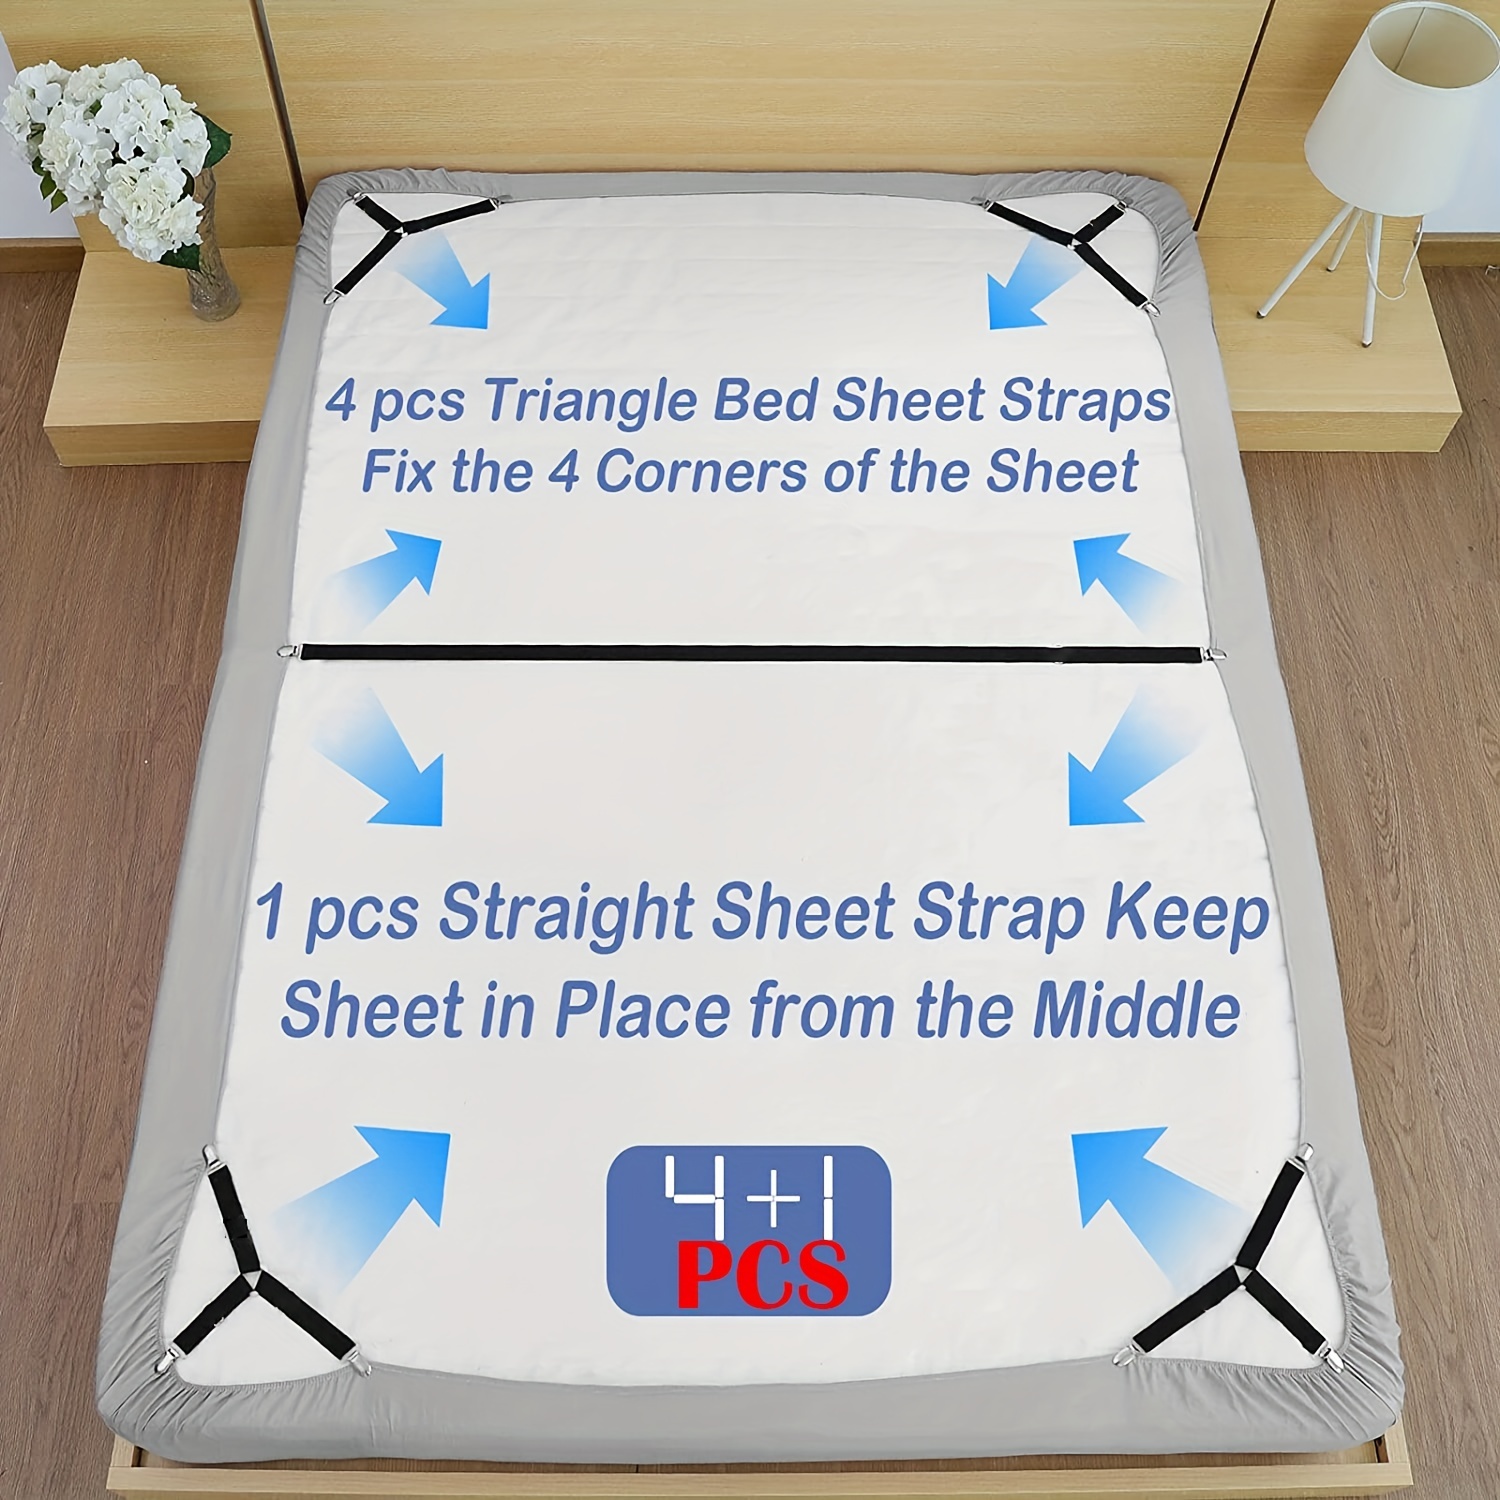 Adjustable Bed Sheet Clips Securely Fasten Sheets Mattress A